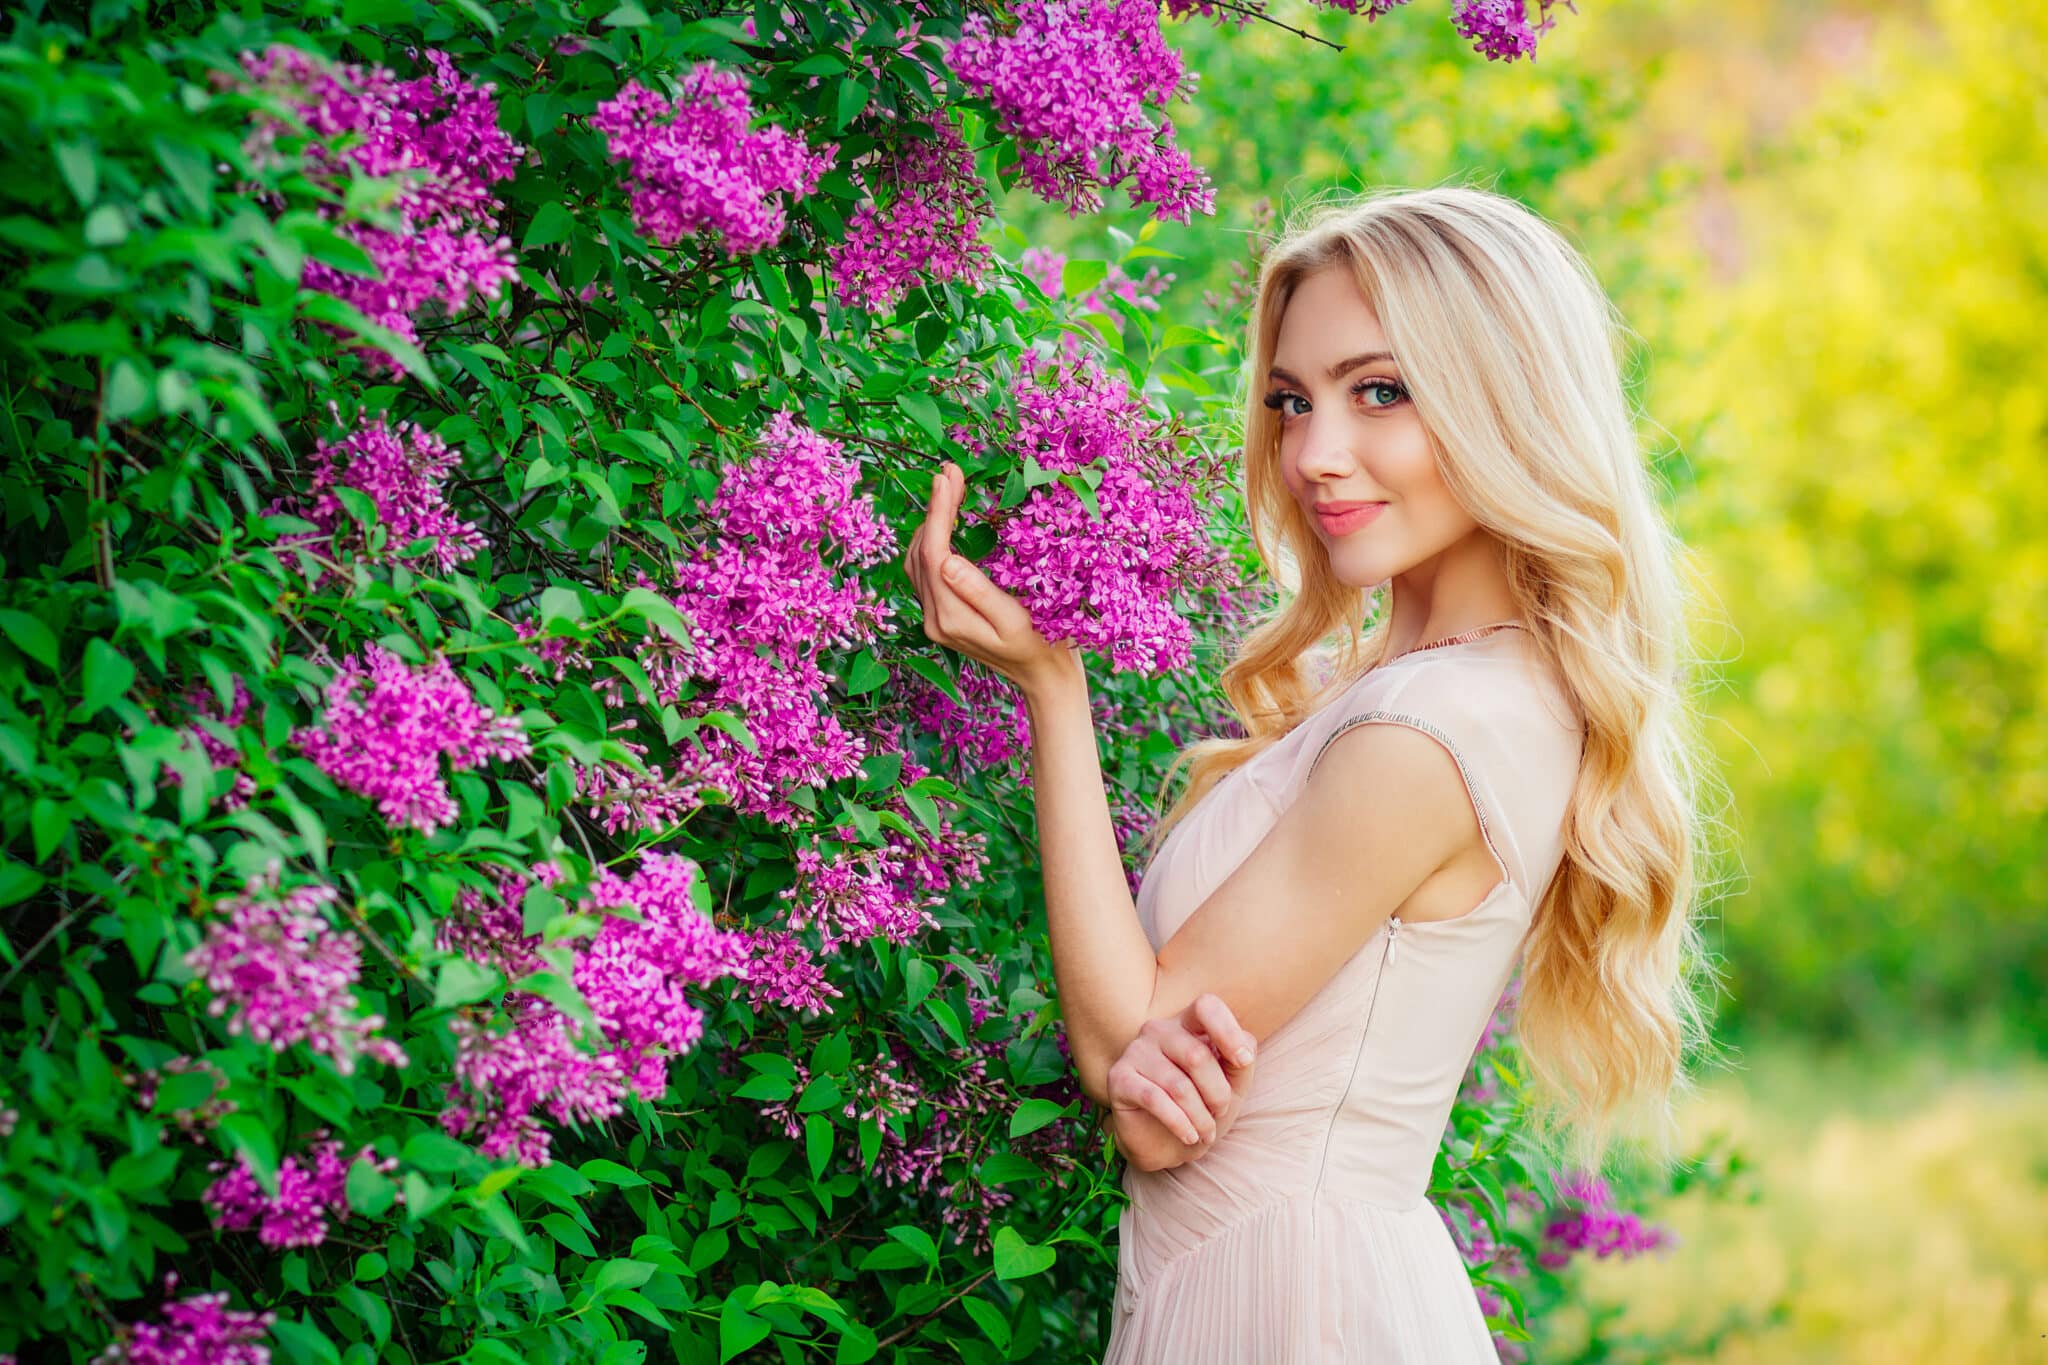 beautiful young blonde girl smiling, portrait of girl outdoors